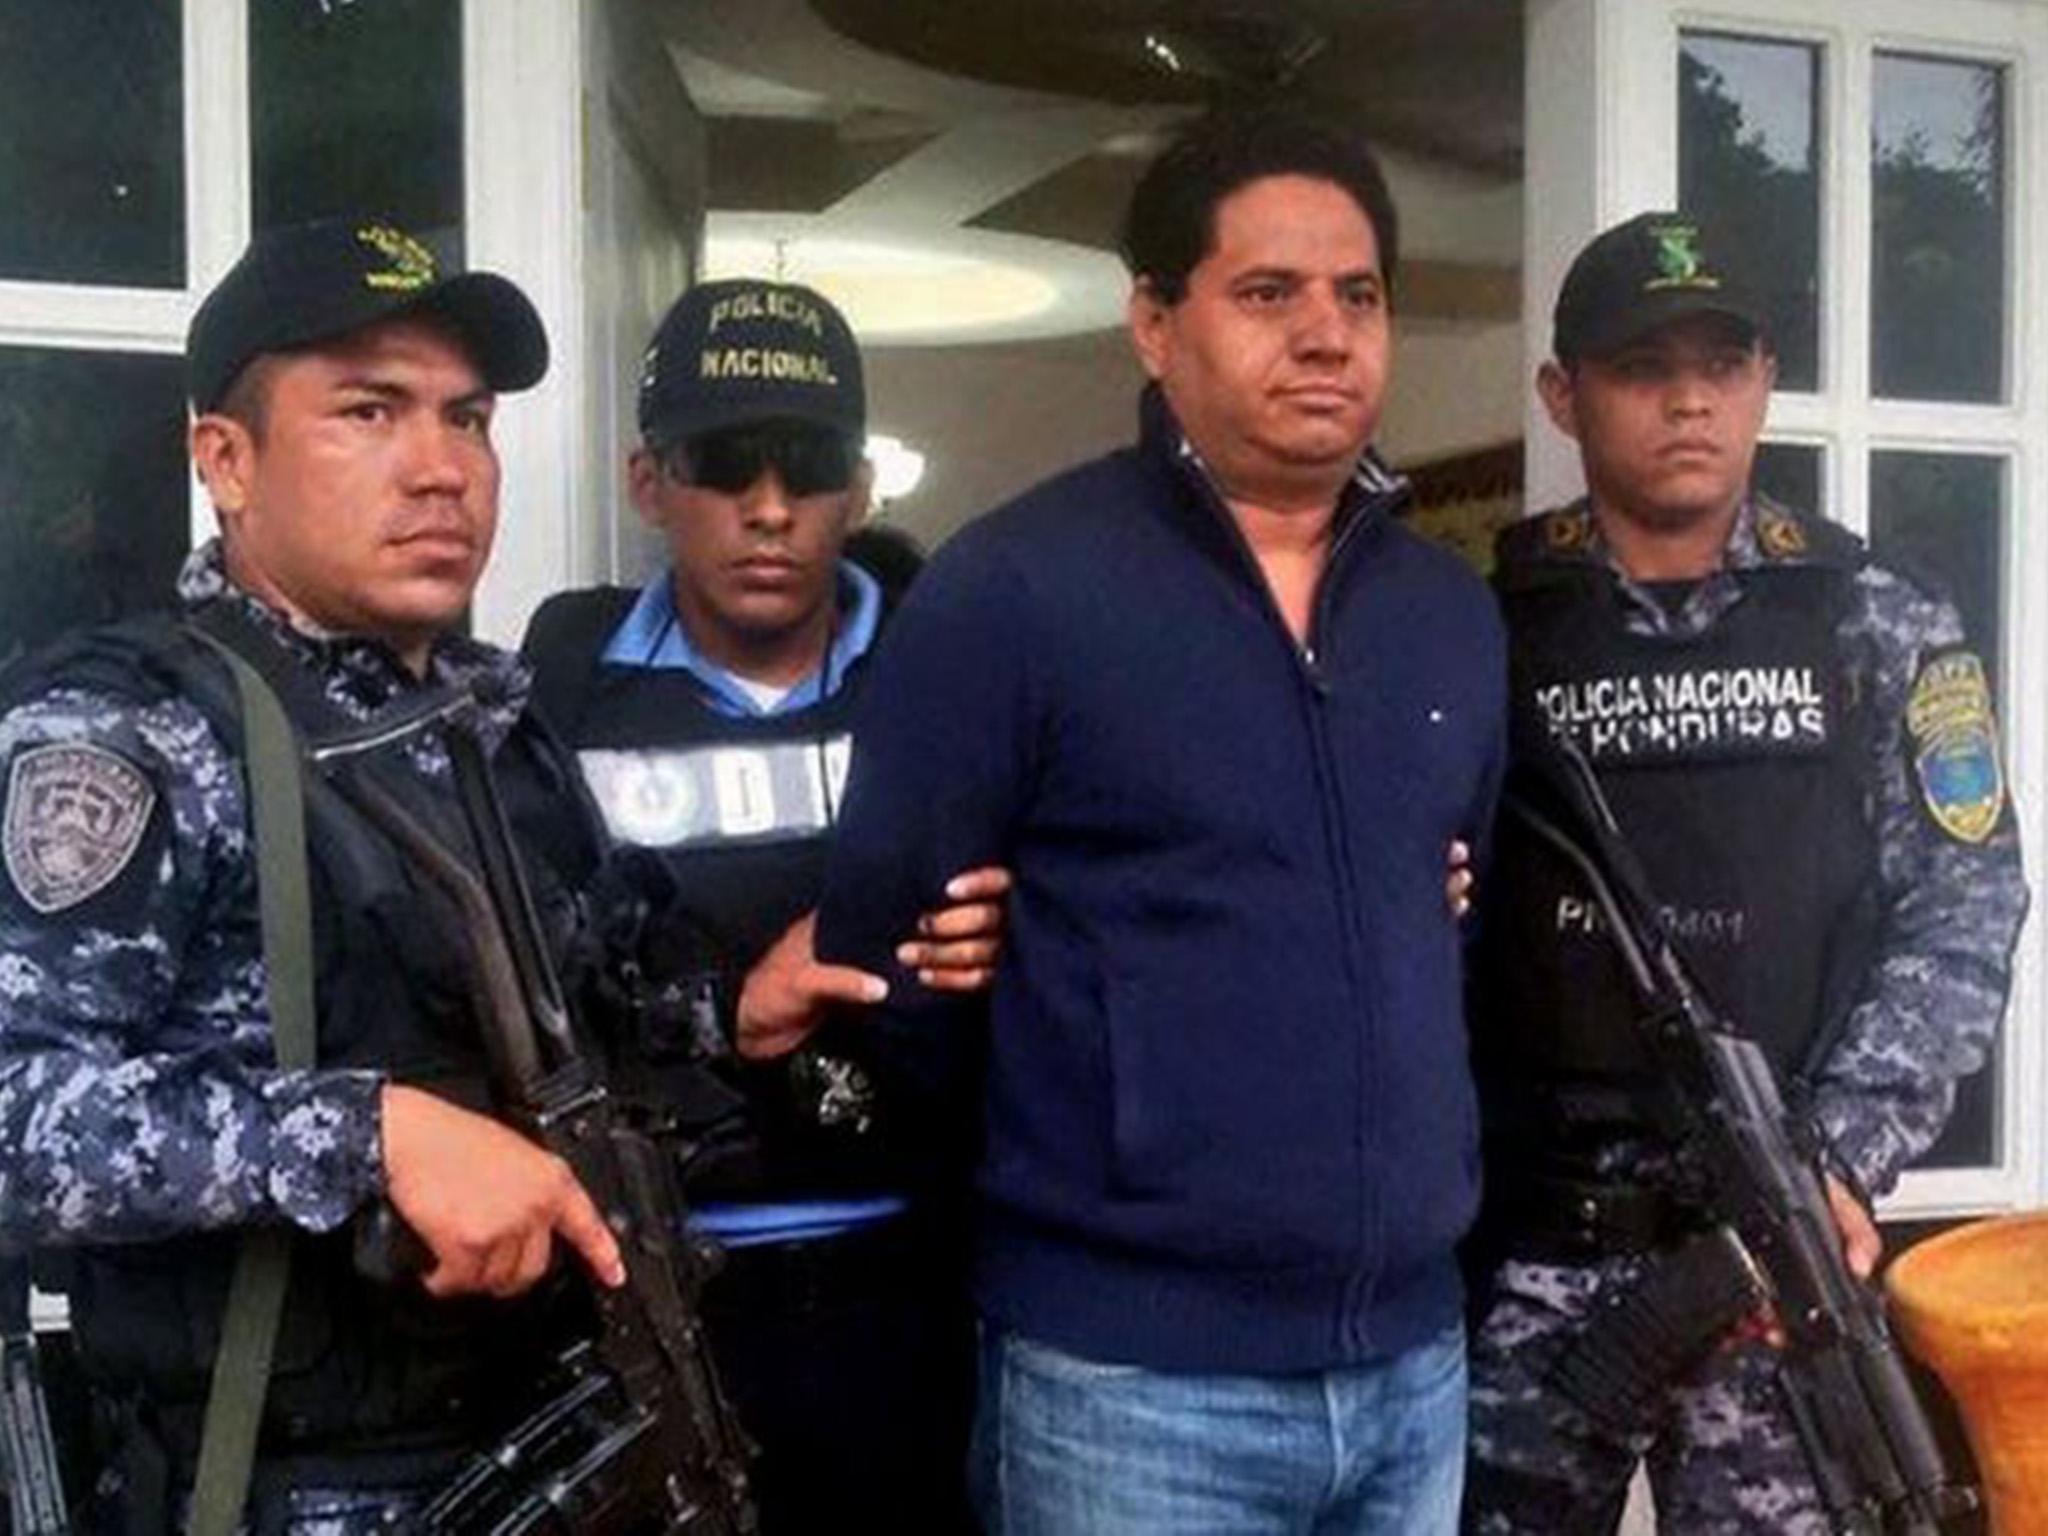 Delvin Salgado insisted to police that he had nothing to do with the alleged crimes